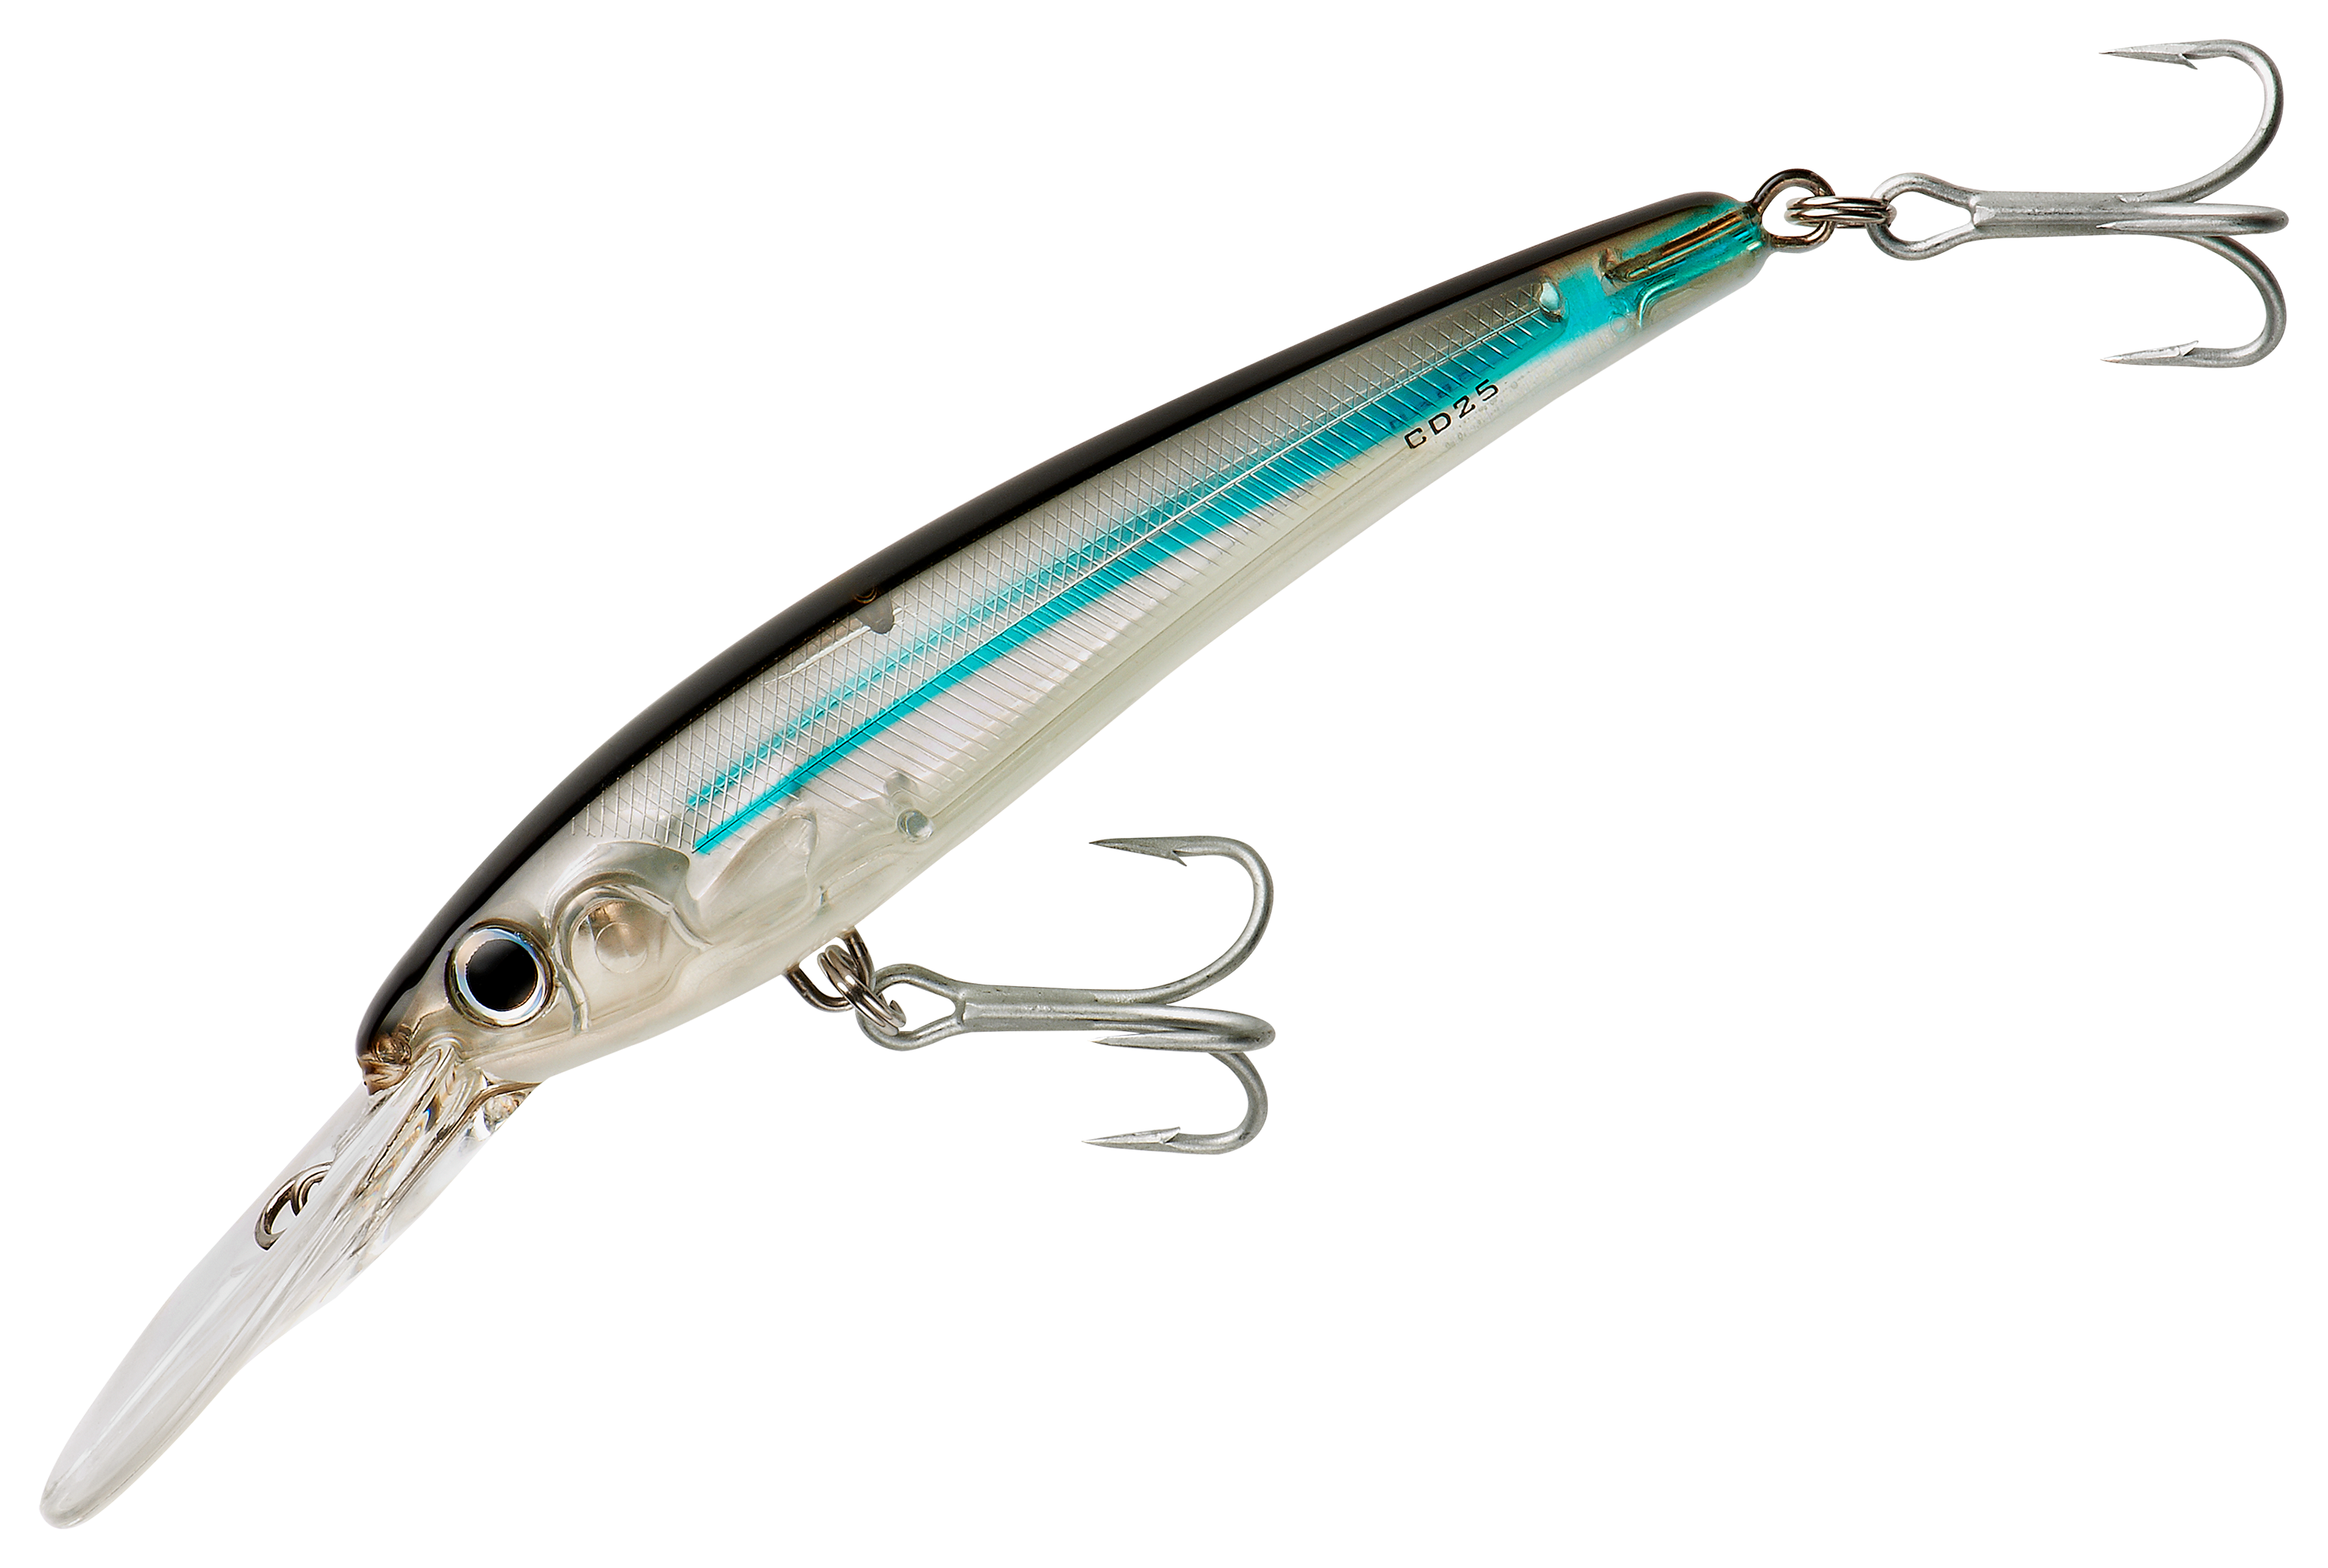 Shakespeare Musky Trolling Minnow Lure - Fin & Flame